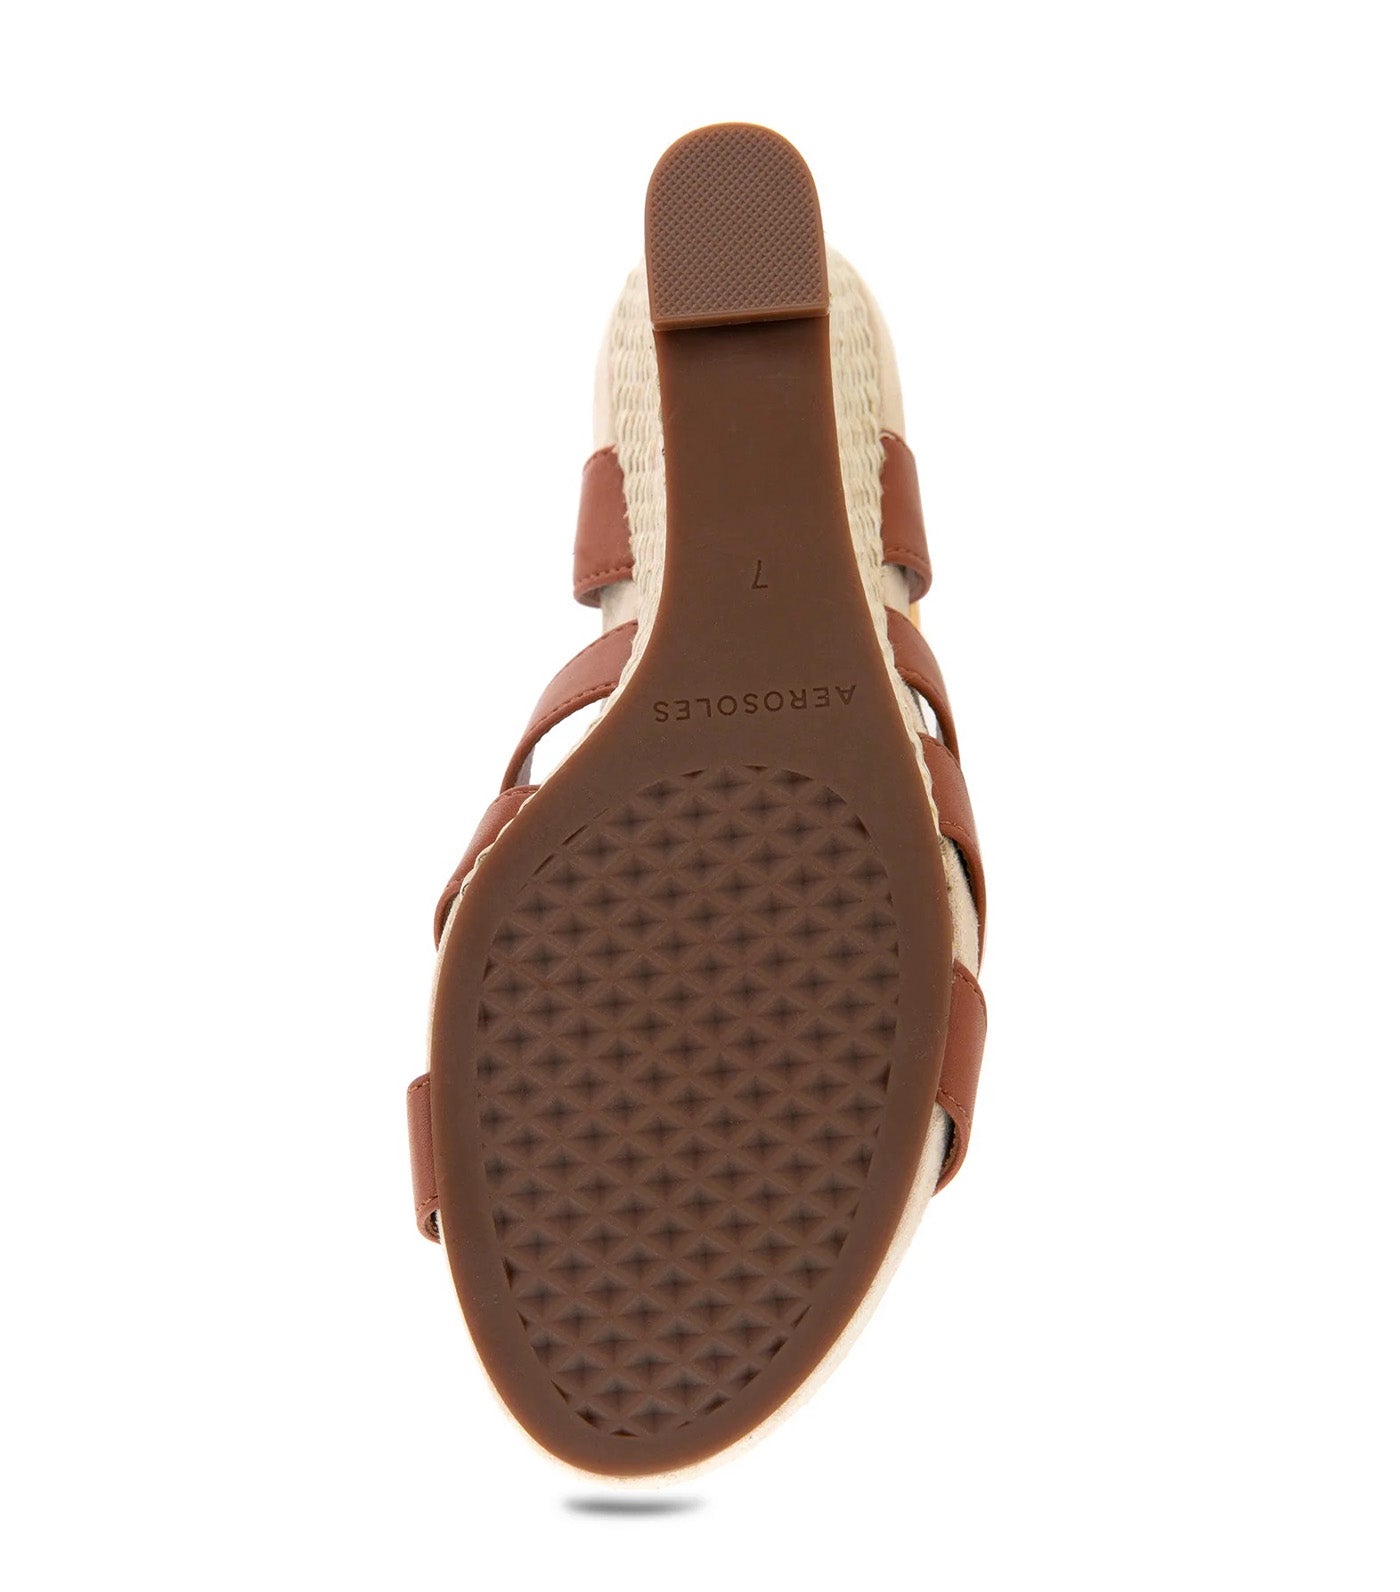 Paige Wedge Sandals Tan